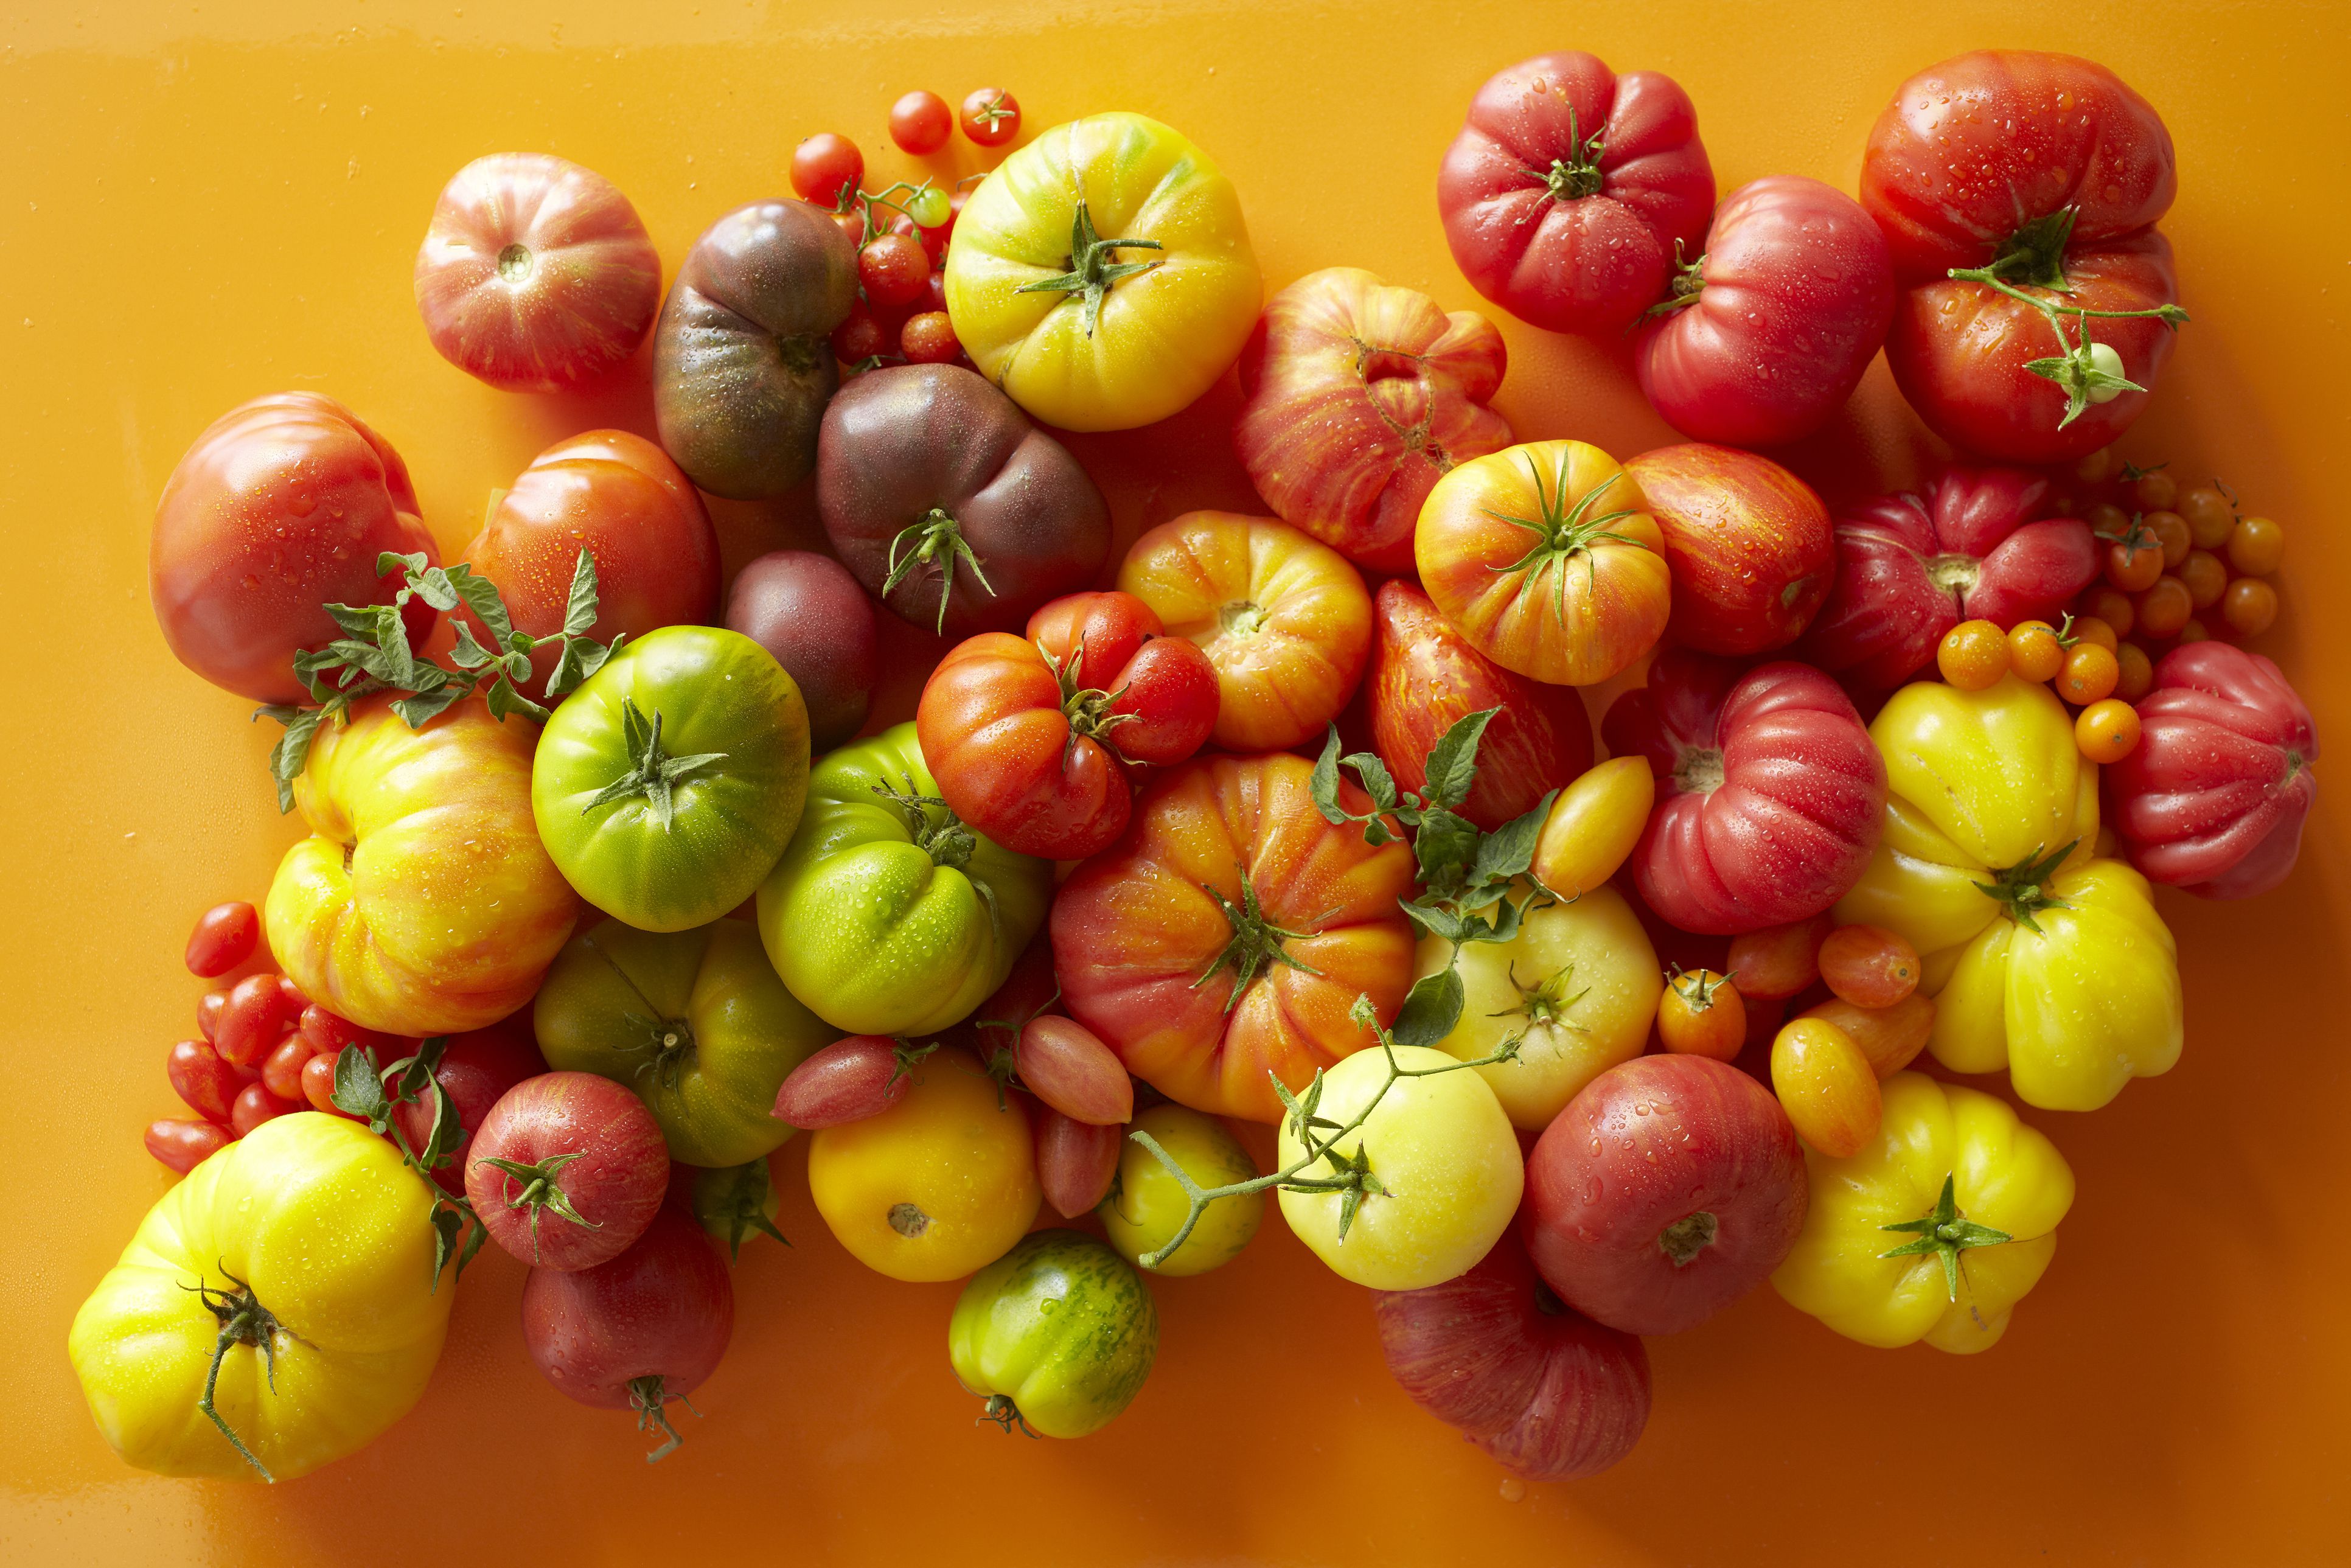 overhead-of-a-variety-of-tomatoes-462112185-588562e95f9b58bdb3a4fd07.jpg